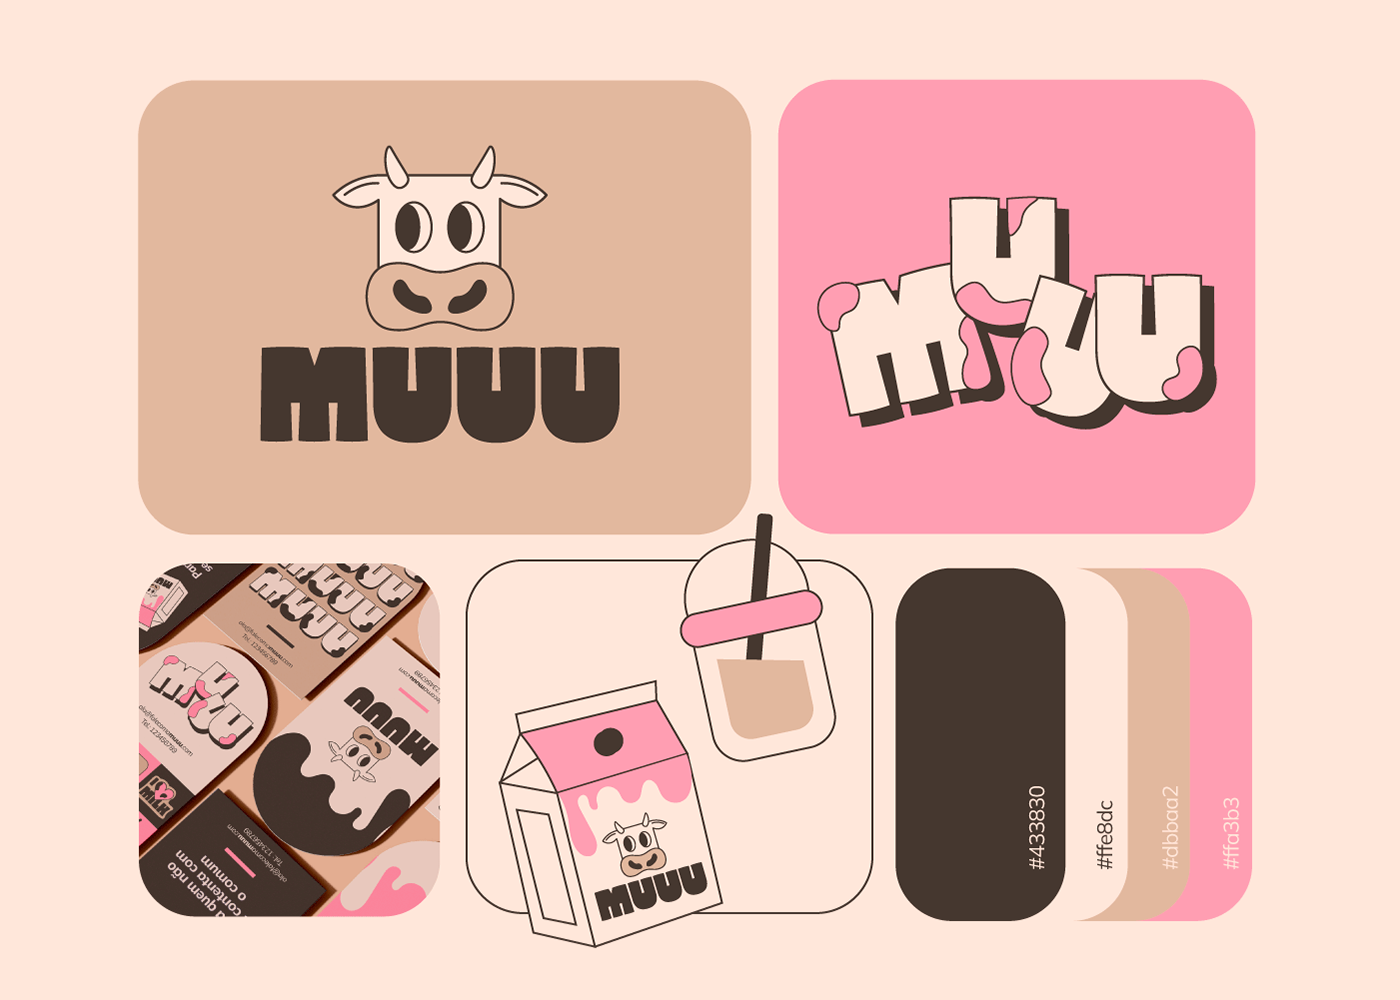 Experience Delight: Muuu Packaging Design & Visual Identity (1 minute read)